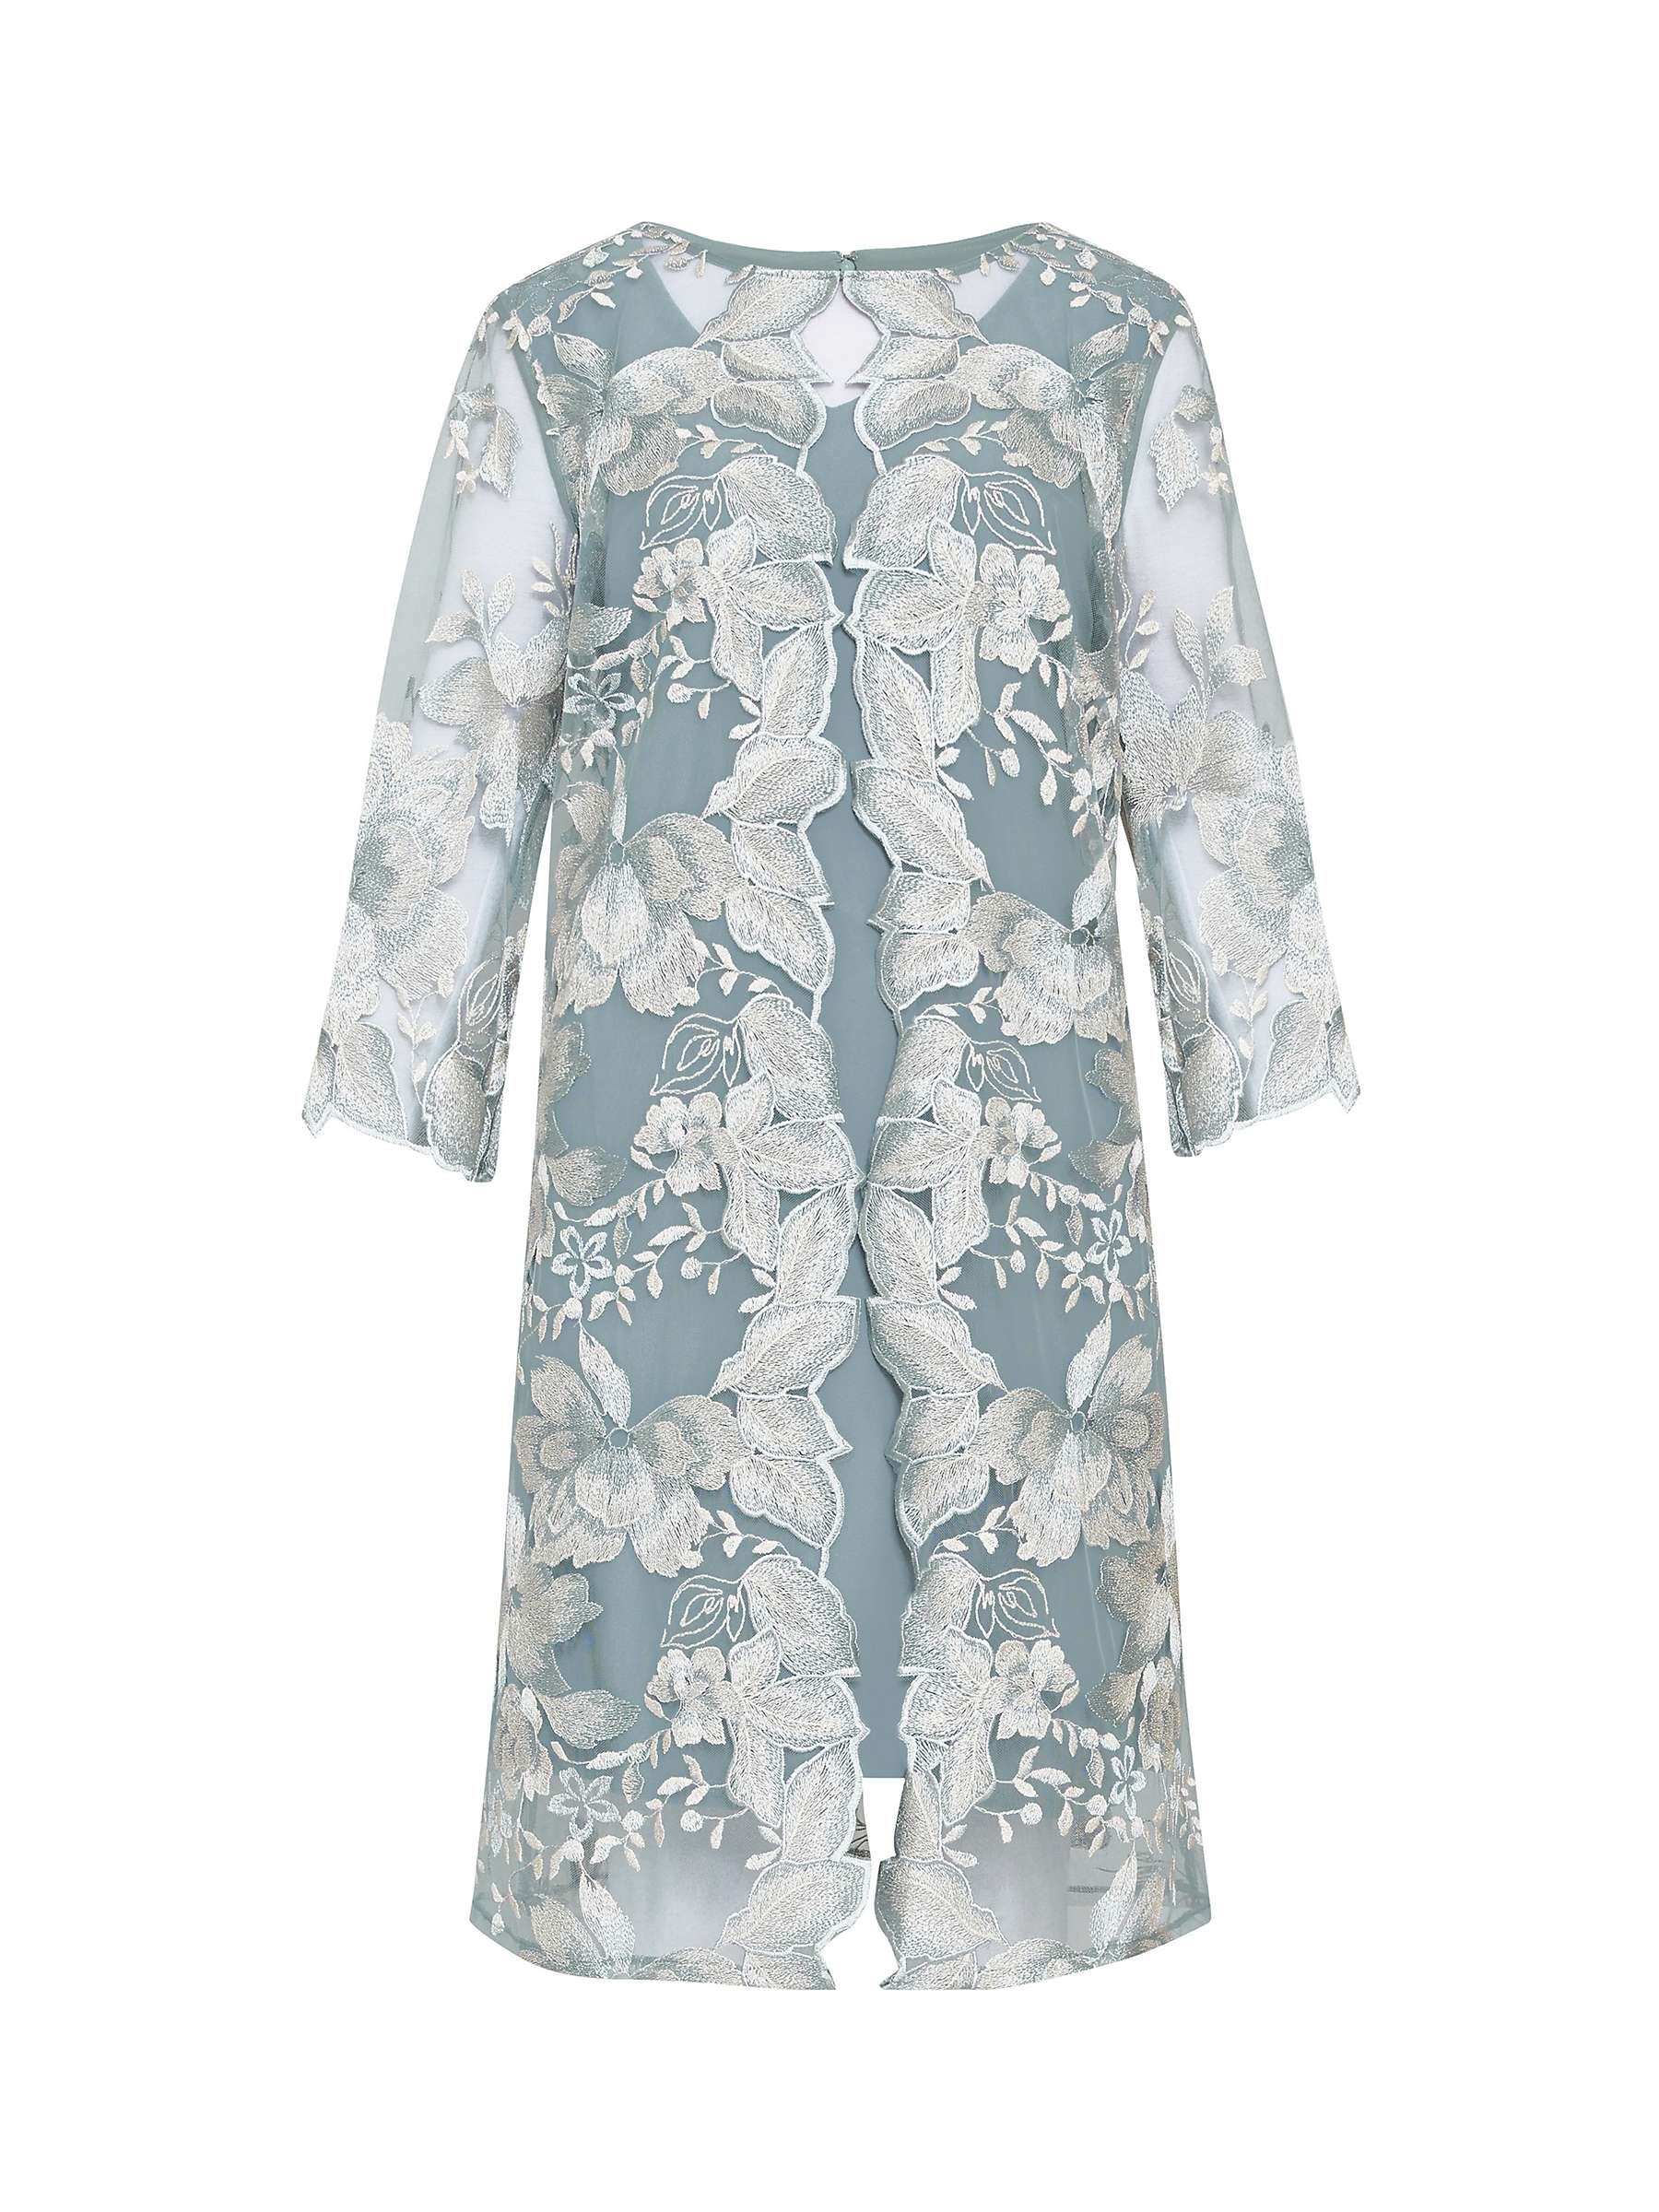 Buy Gina Bacconi Savoy Embroidered Lace Jacket and Dress, Ice Sage Online at johnlewis.com